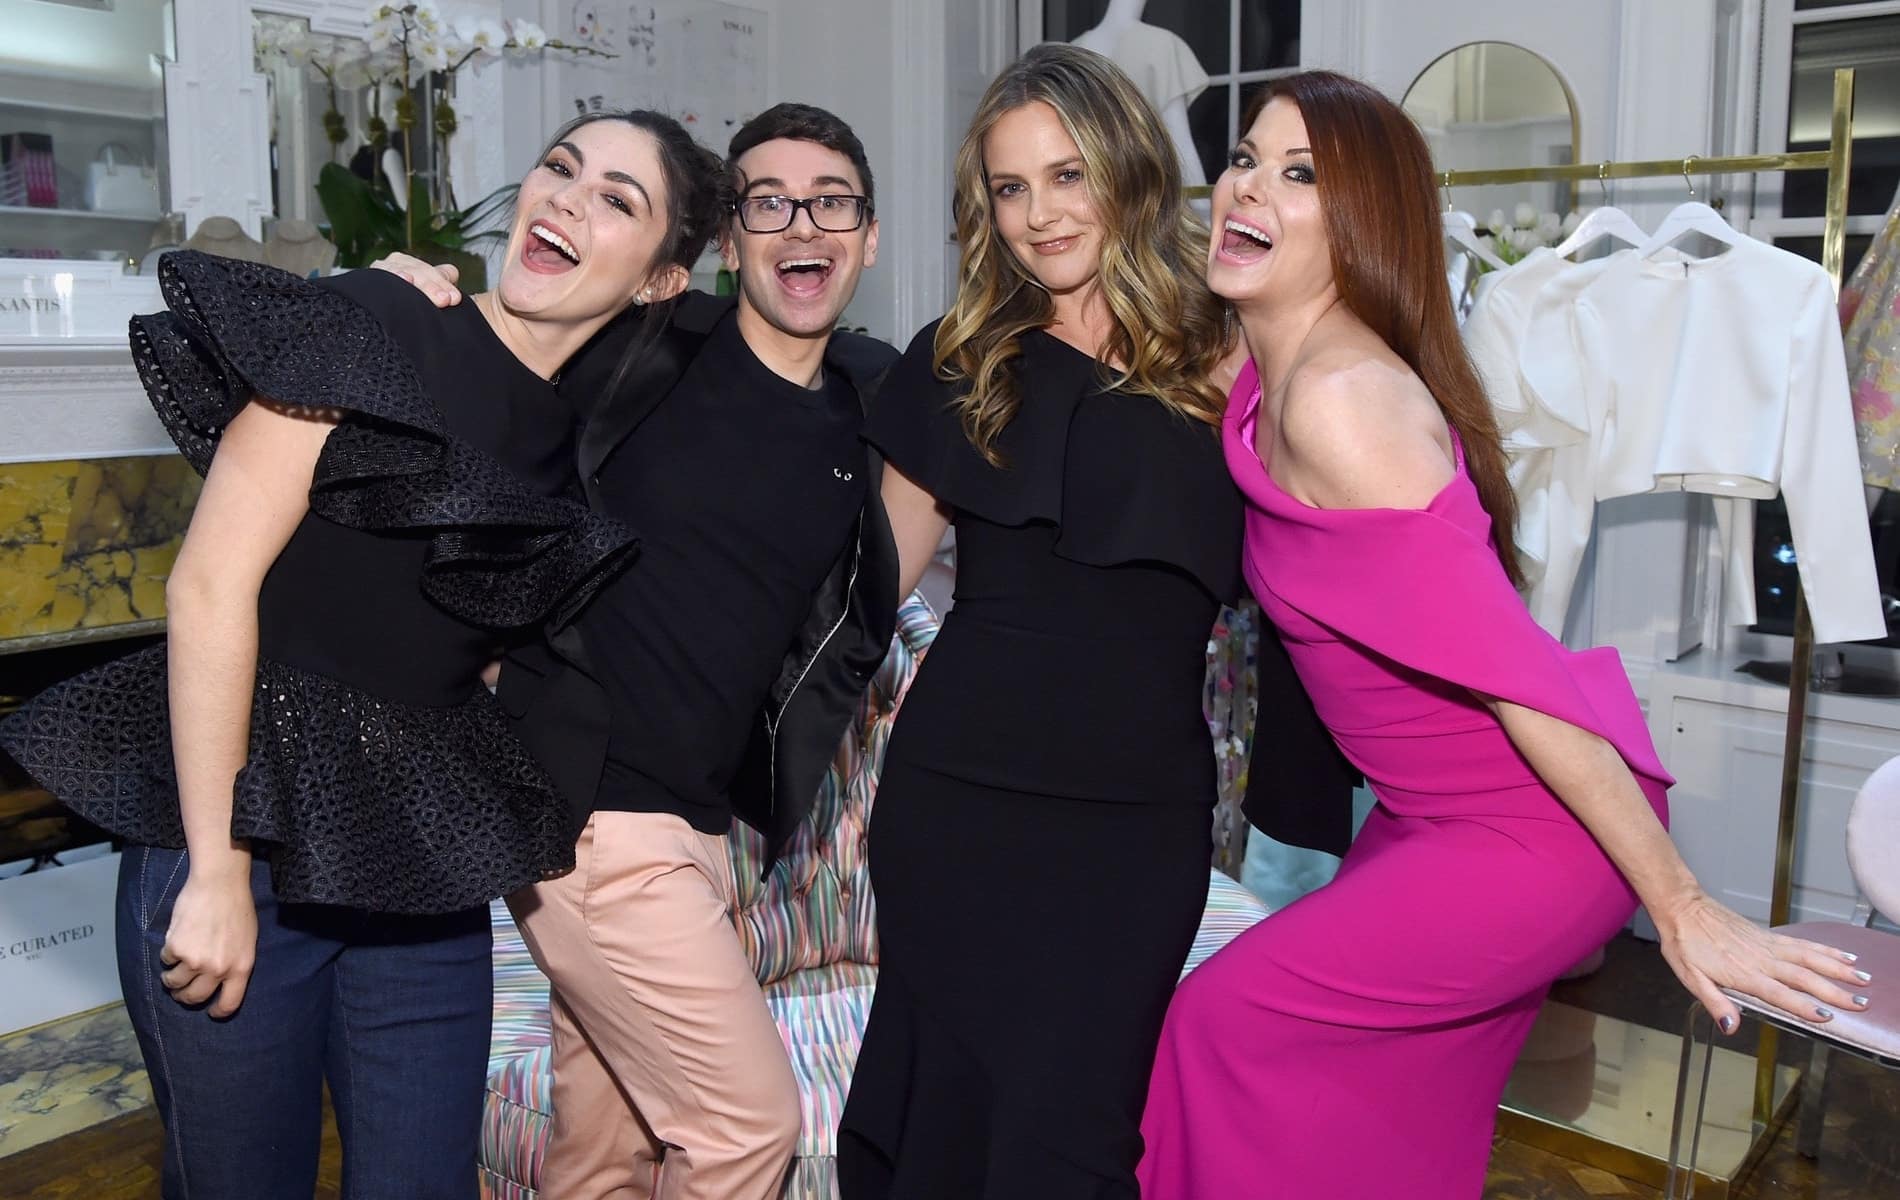 Christian Siriano, The Curated NYC, New York, New York City, Fashion, celebrities, VIE Magazine, Alicia Silverstone, Getty Images, Isabelle Fuhrman, Debra Messing